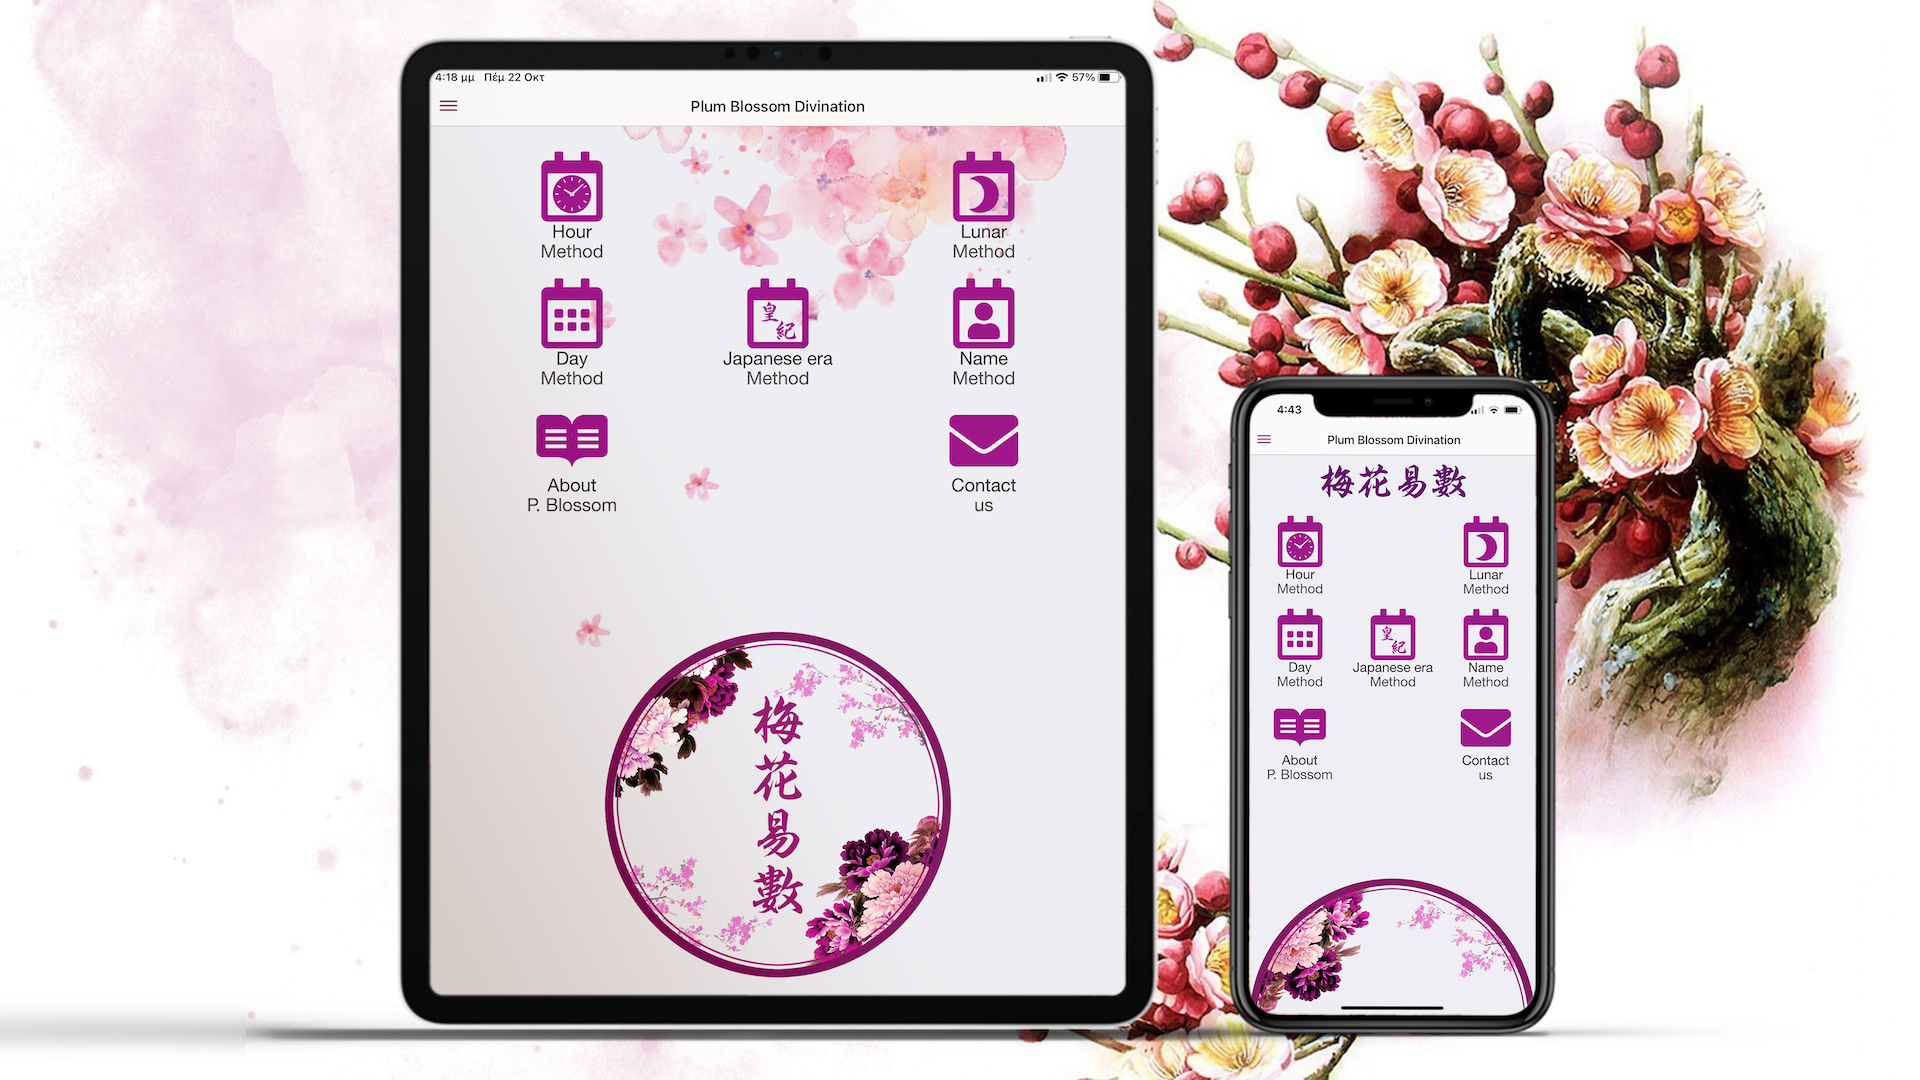 Plum Blossom Divination App for iPhone and iPad